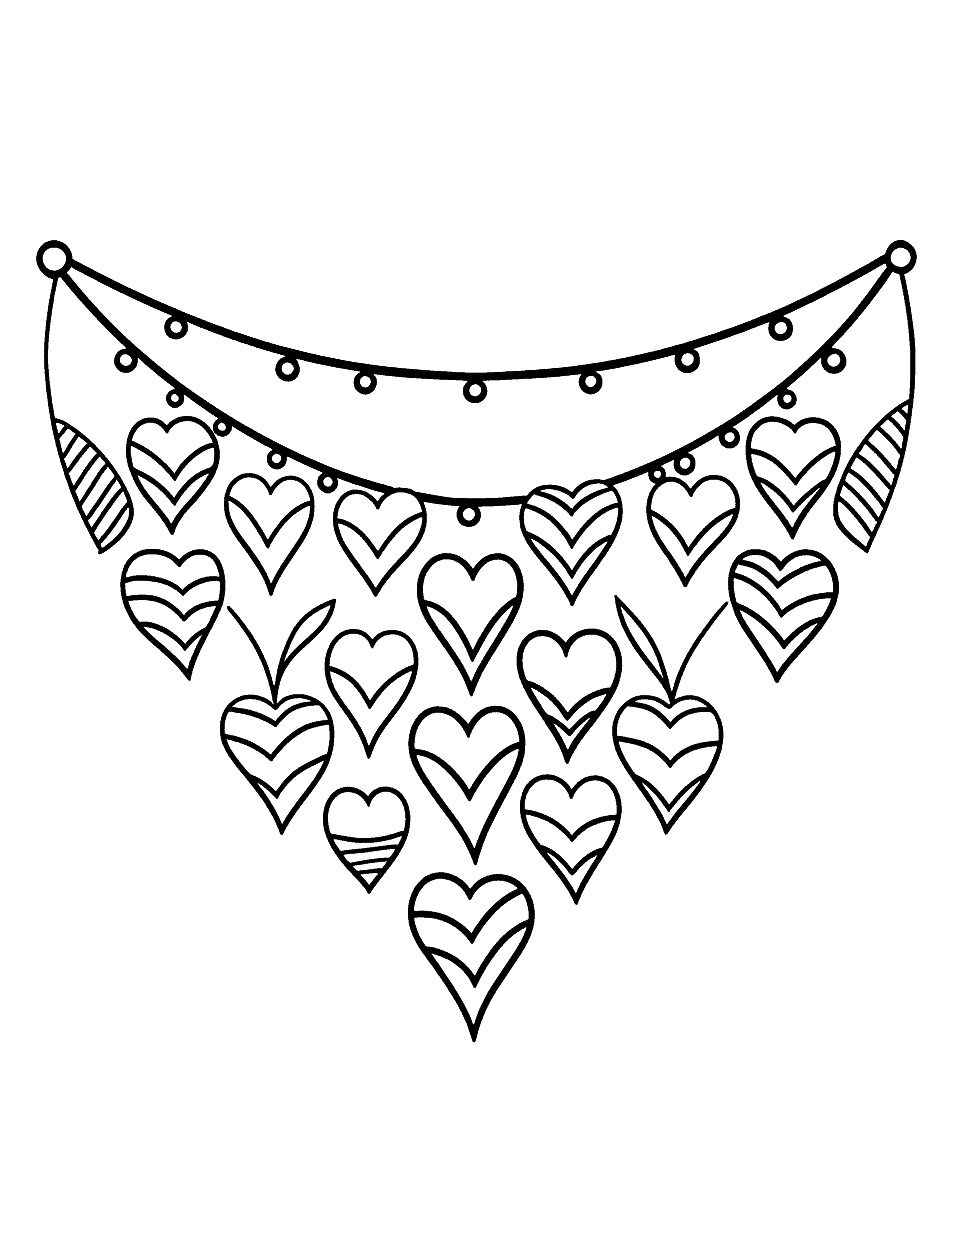 Heart Bunting Coloring Page - A bunting of hearts for a celebration.